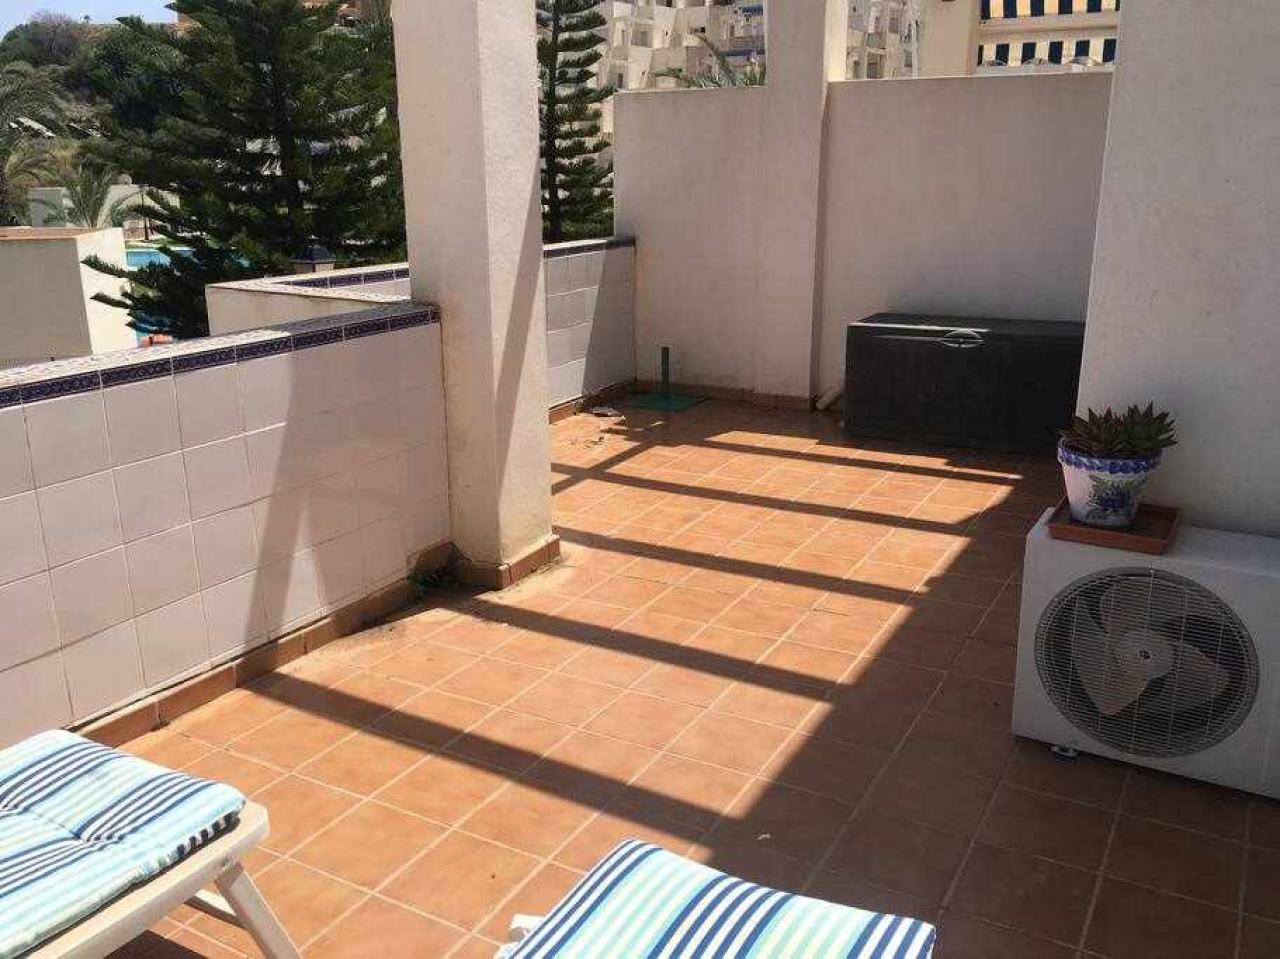 3 bedroom apartment, ideal for families: Apartment for Rent in Mojácar, Almería